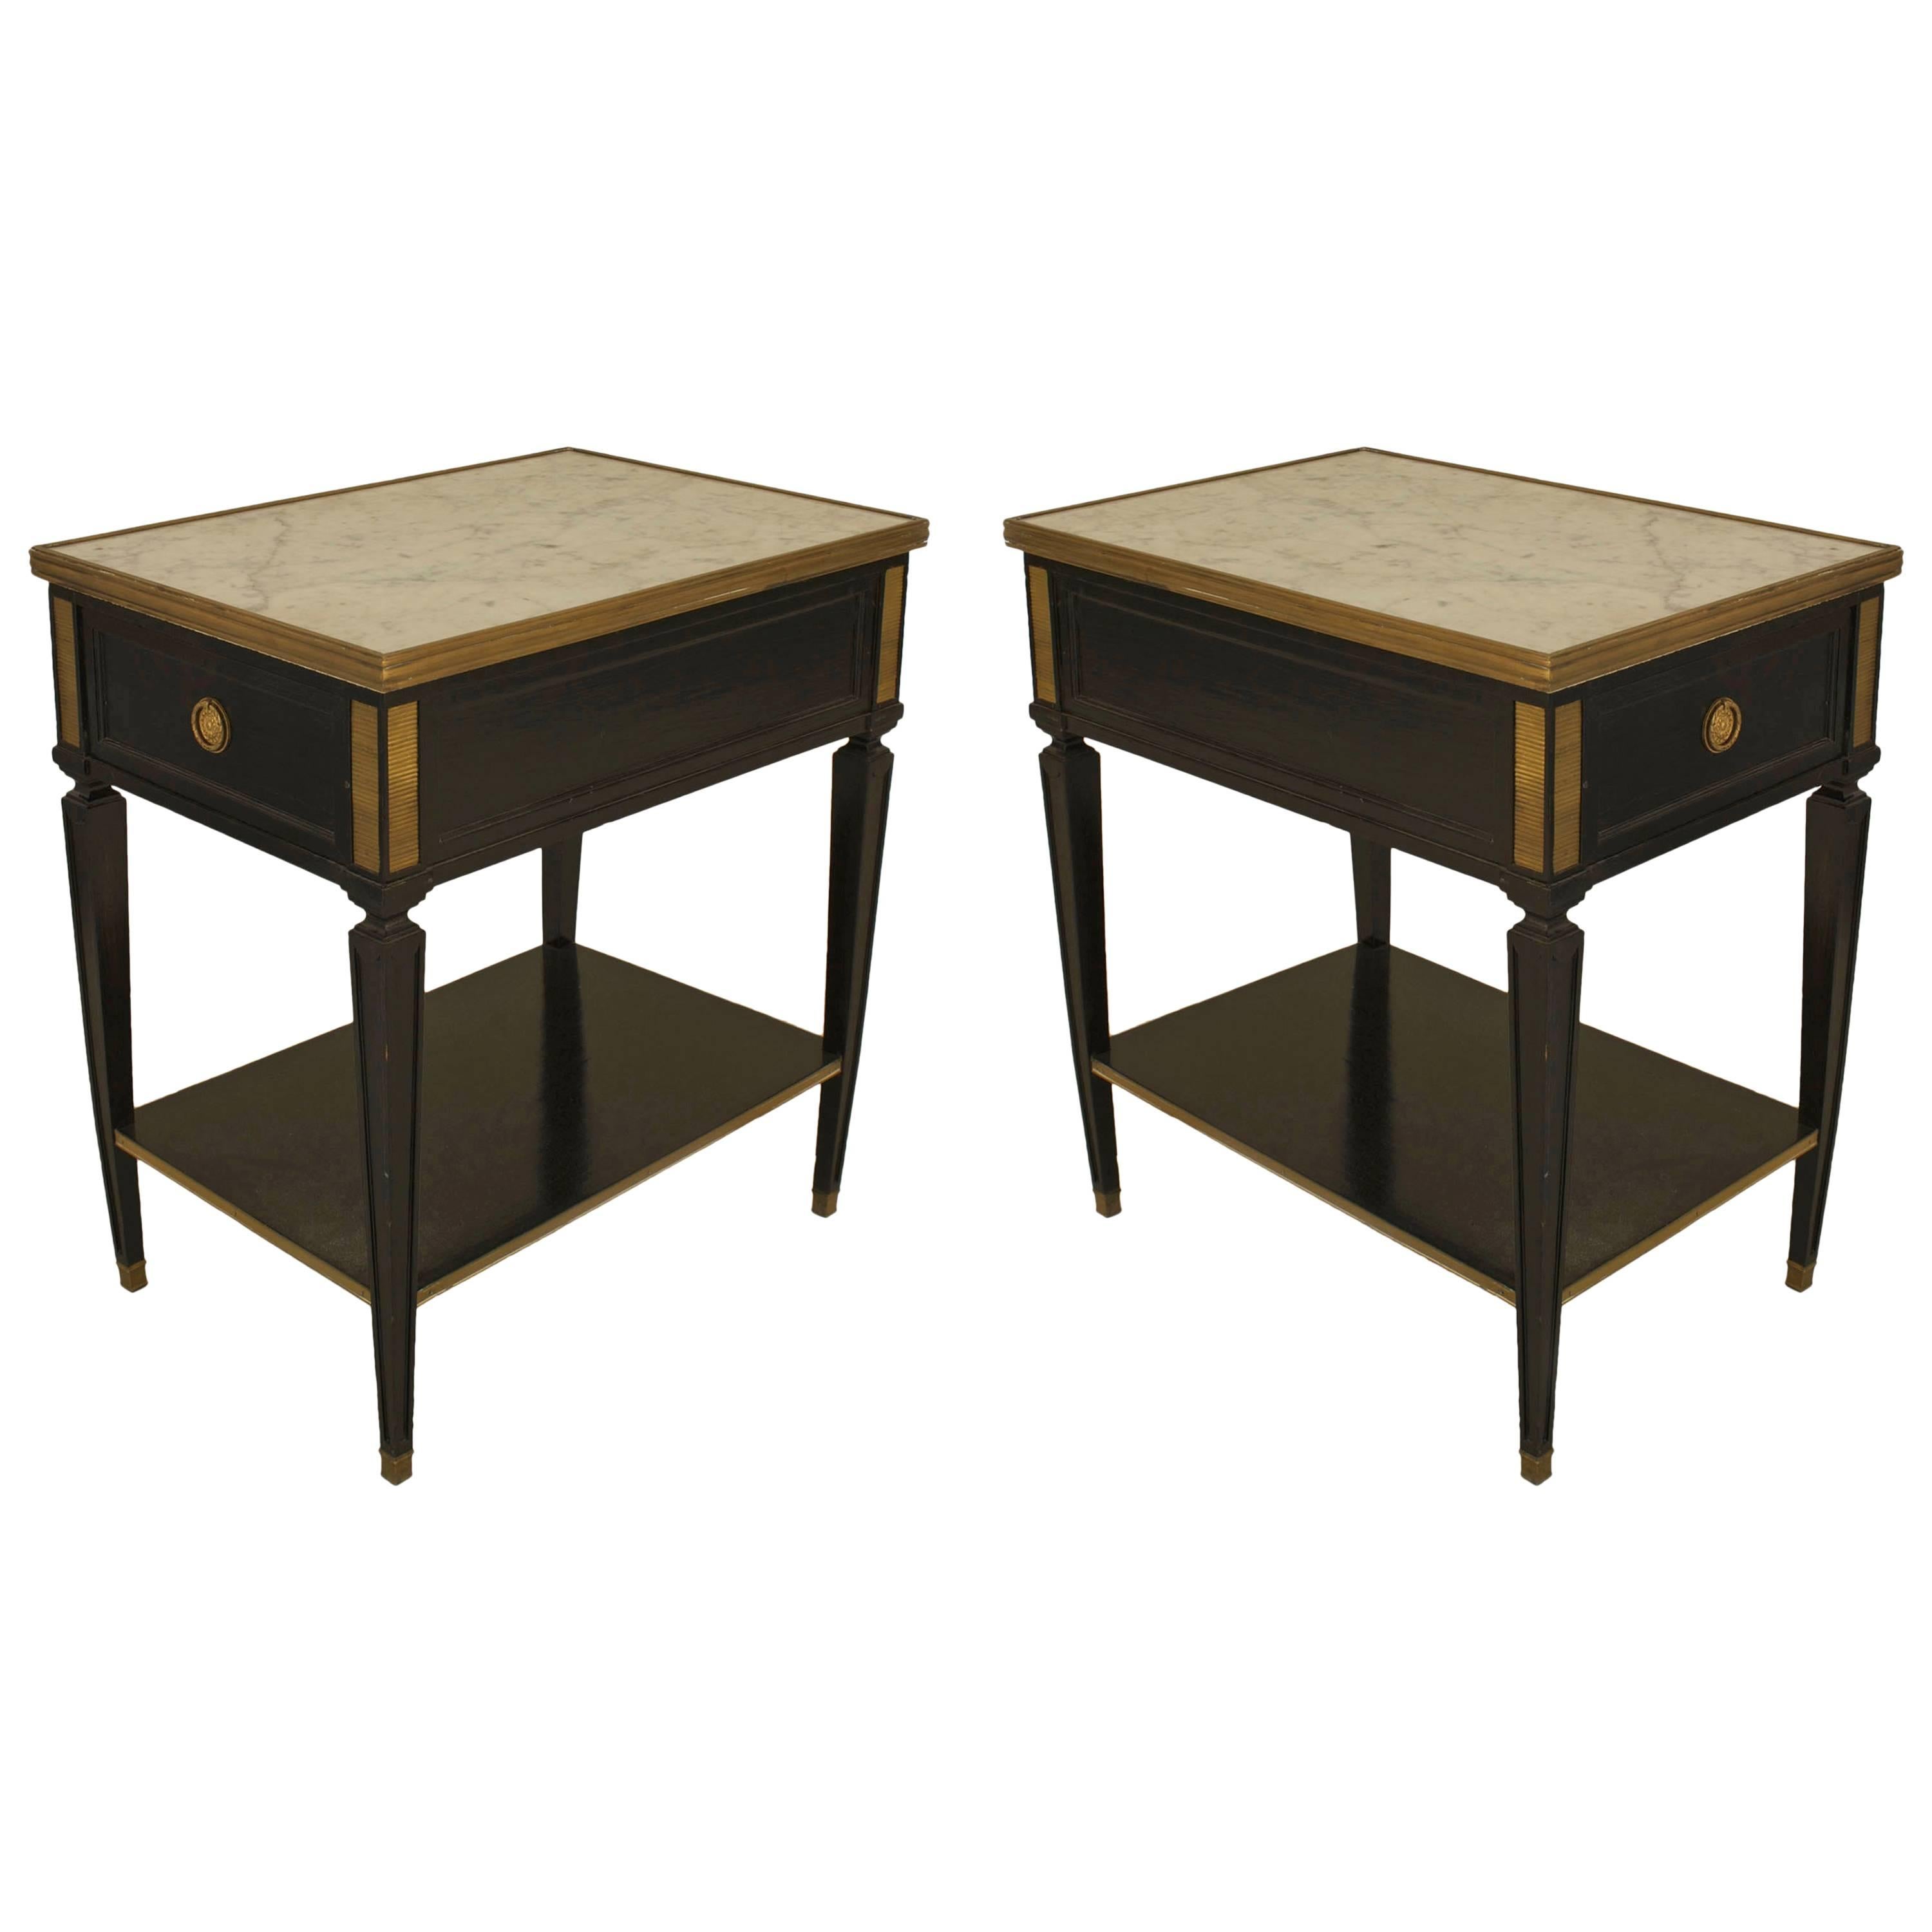 Pair of French Louis XVI Style Bronze-Trimmed End Tables by Jansen